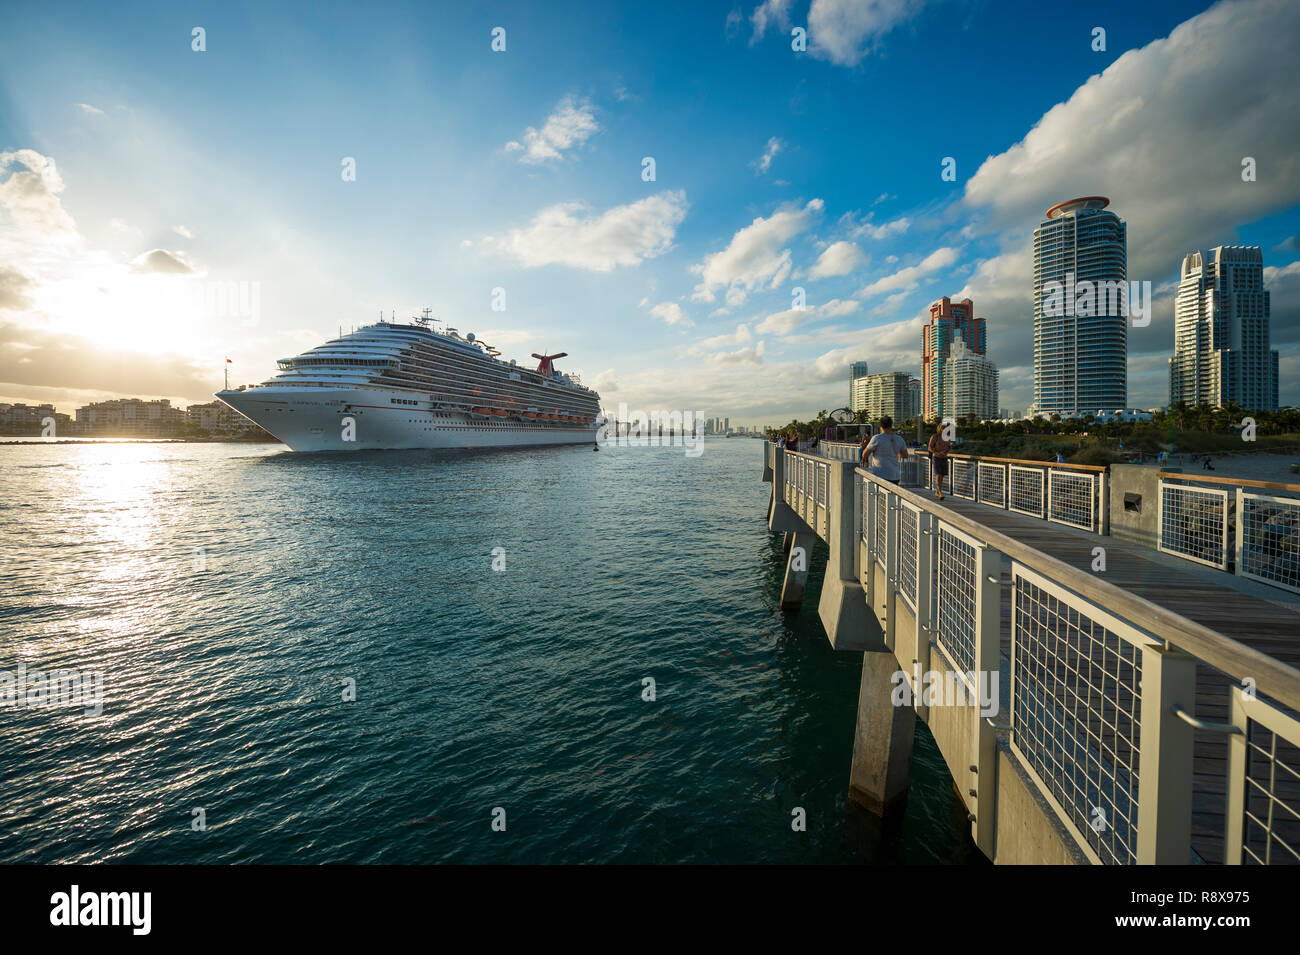 MIAMI - DECEMBER 16, 2018: The Carnival Victory cruise ship departs PortMiami, which set a one-day record of 52,000 passengers at the season's start. Stock Photo